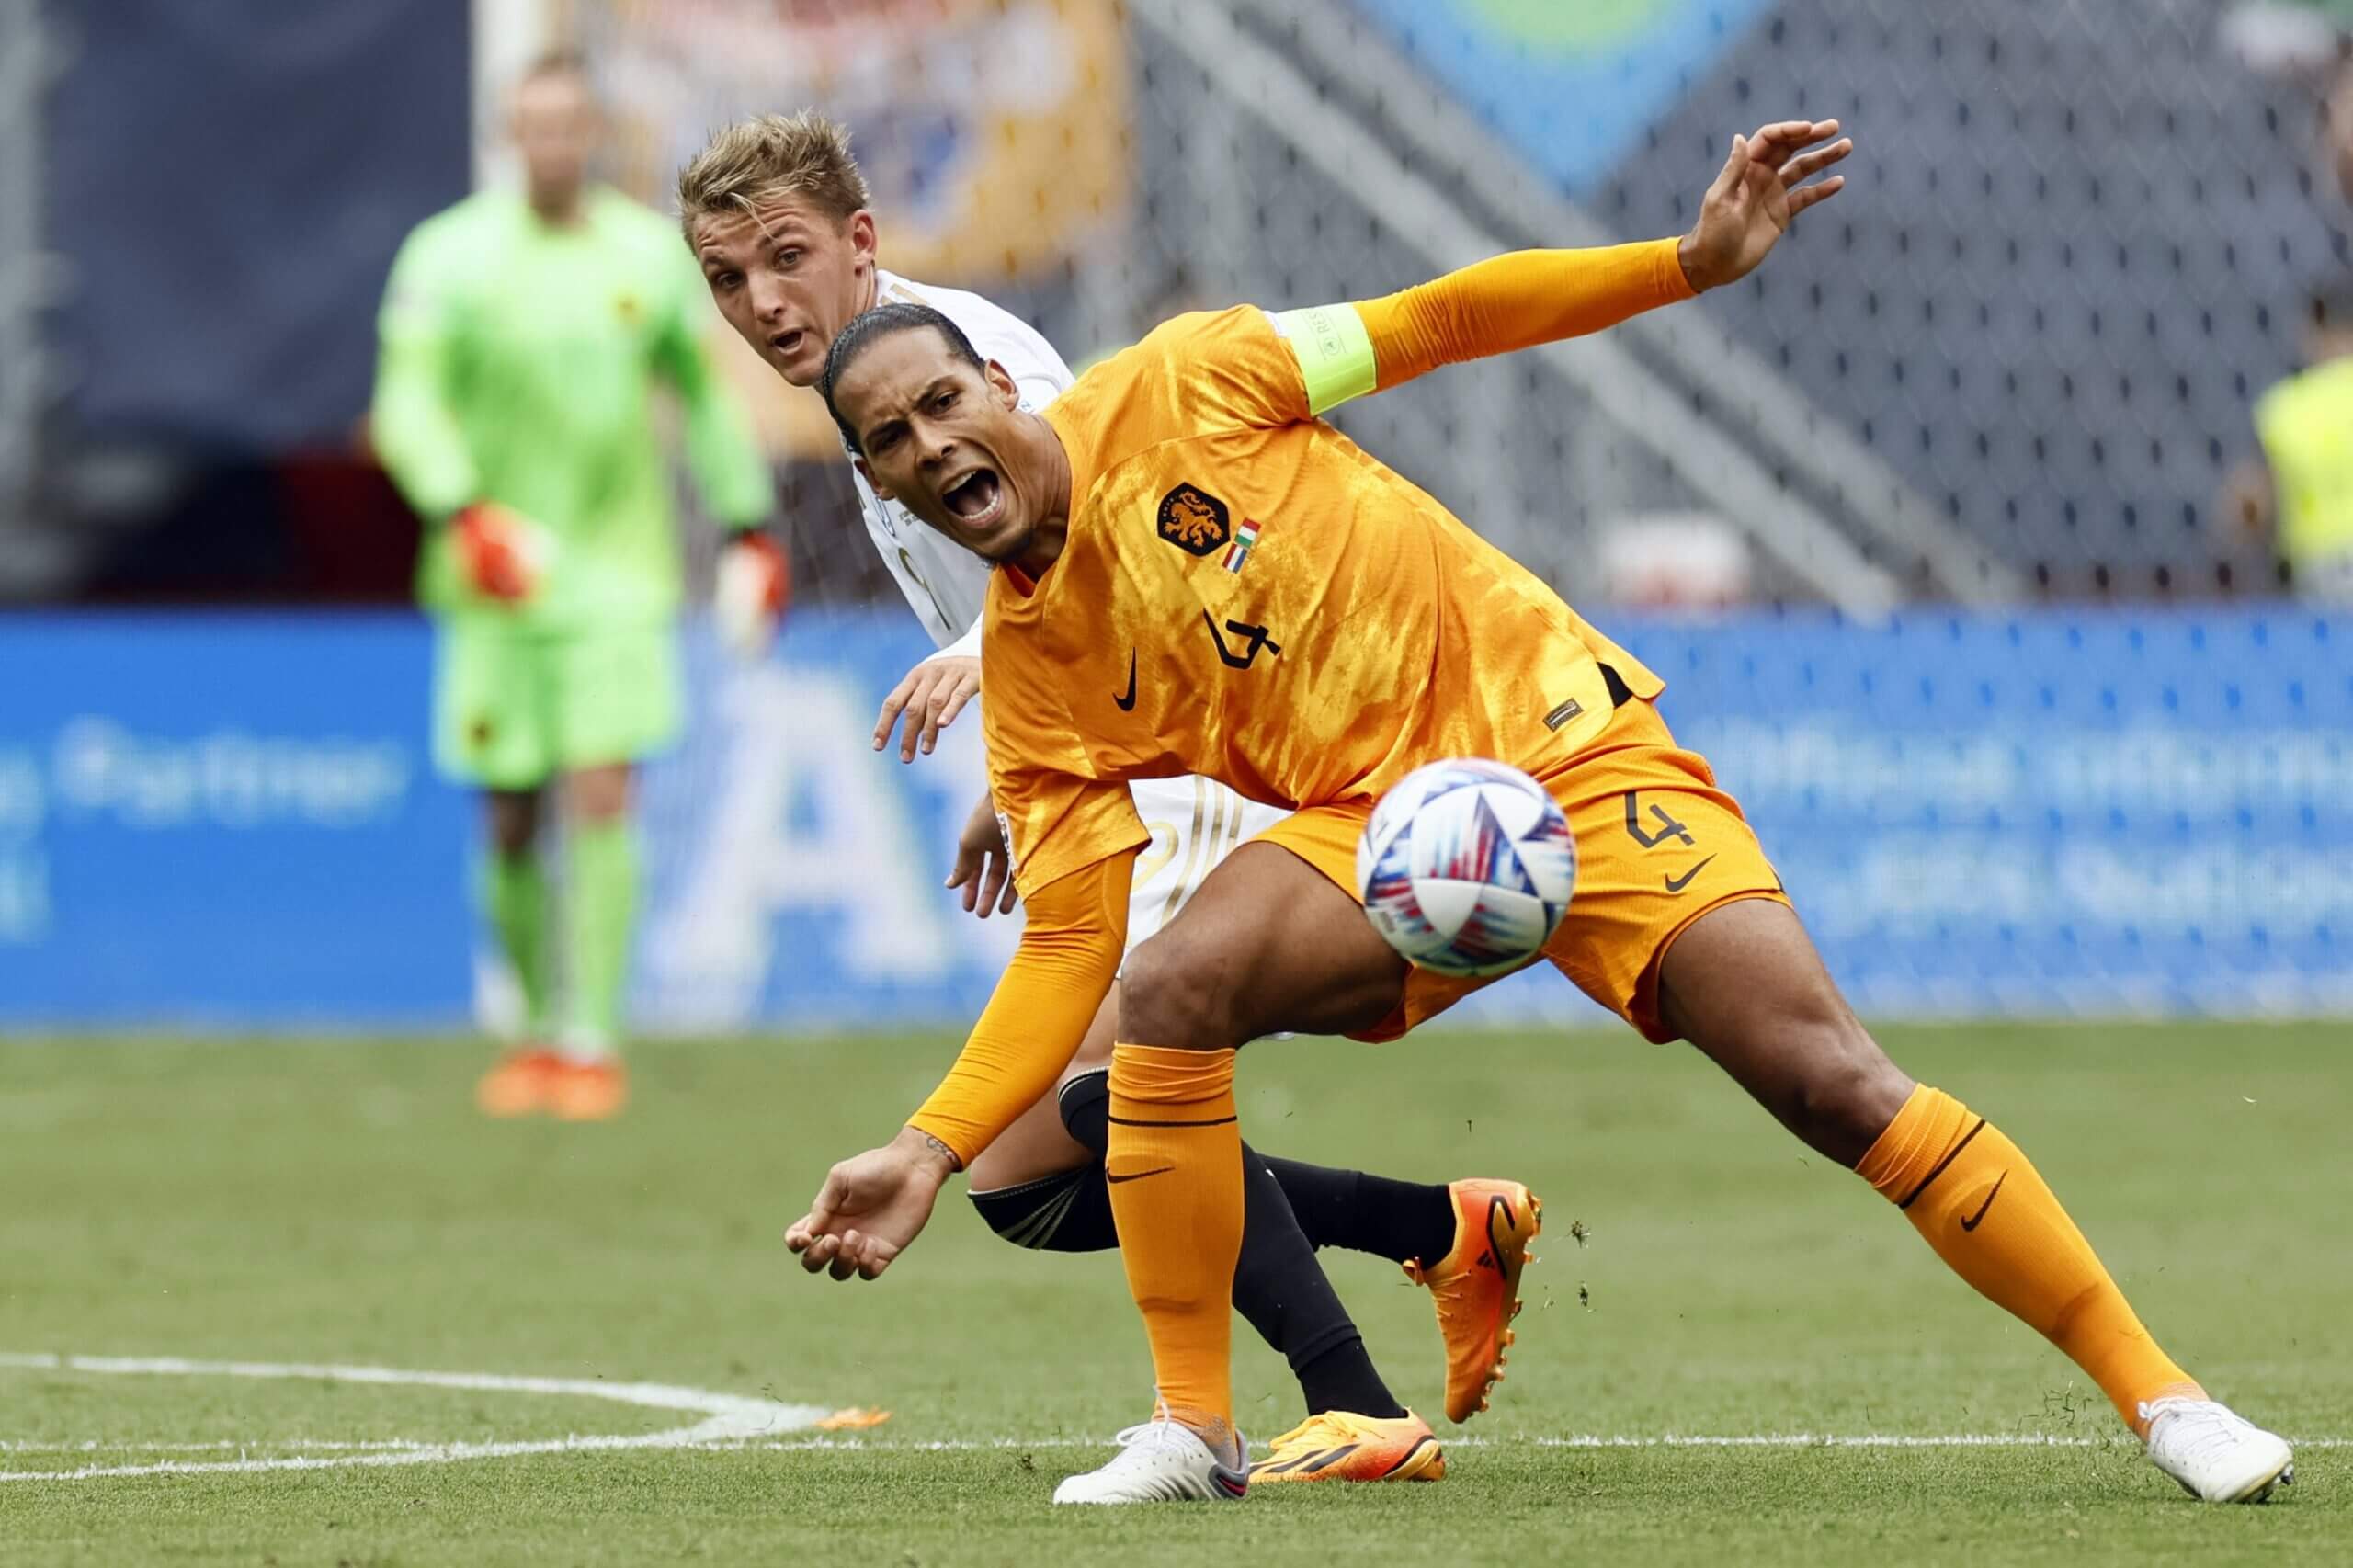 Van Dijk's roles in the national team and the club are completely different although he still plays center back.